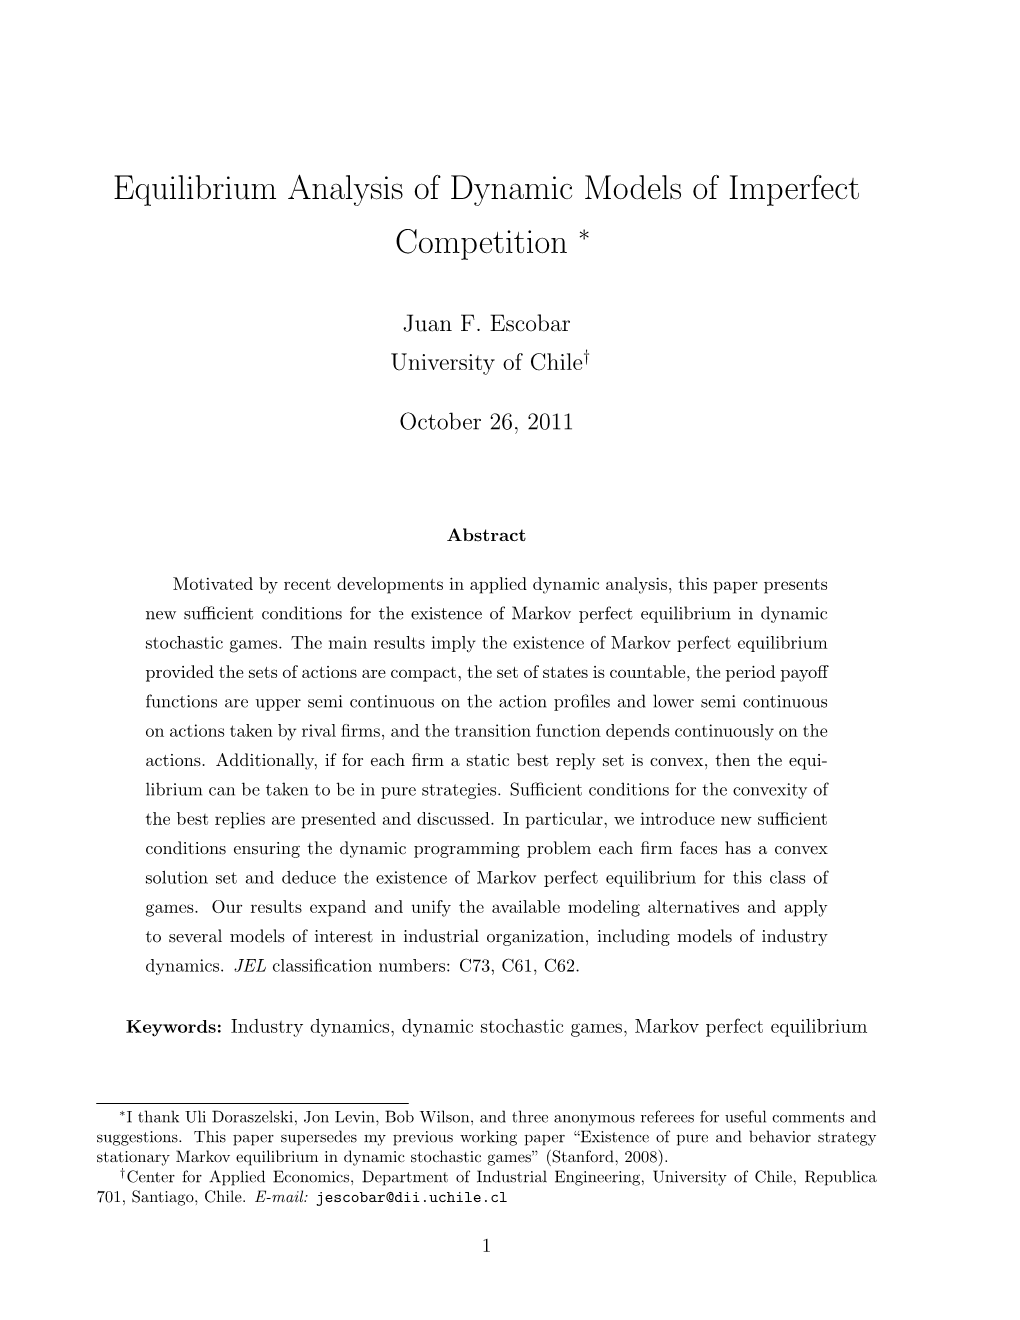 Equilibrium Analysis of Dynamic Models of Imperfect Competition ∗